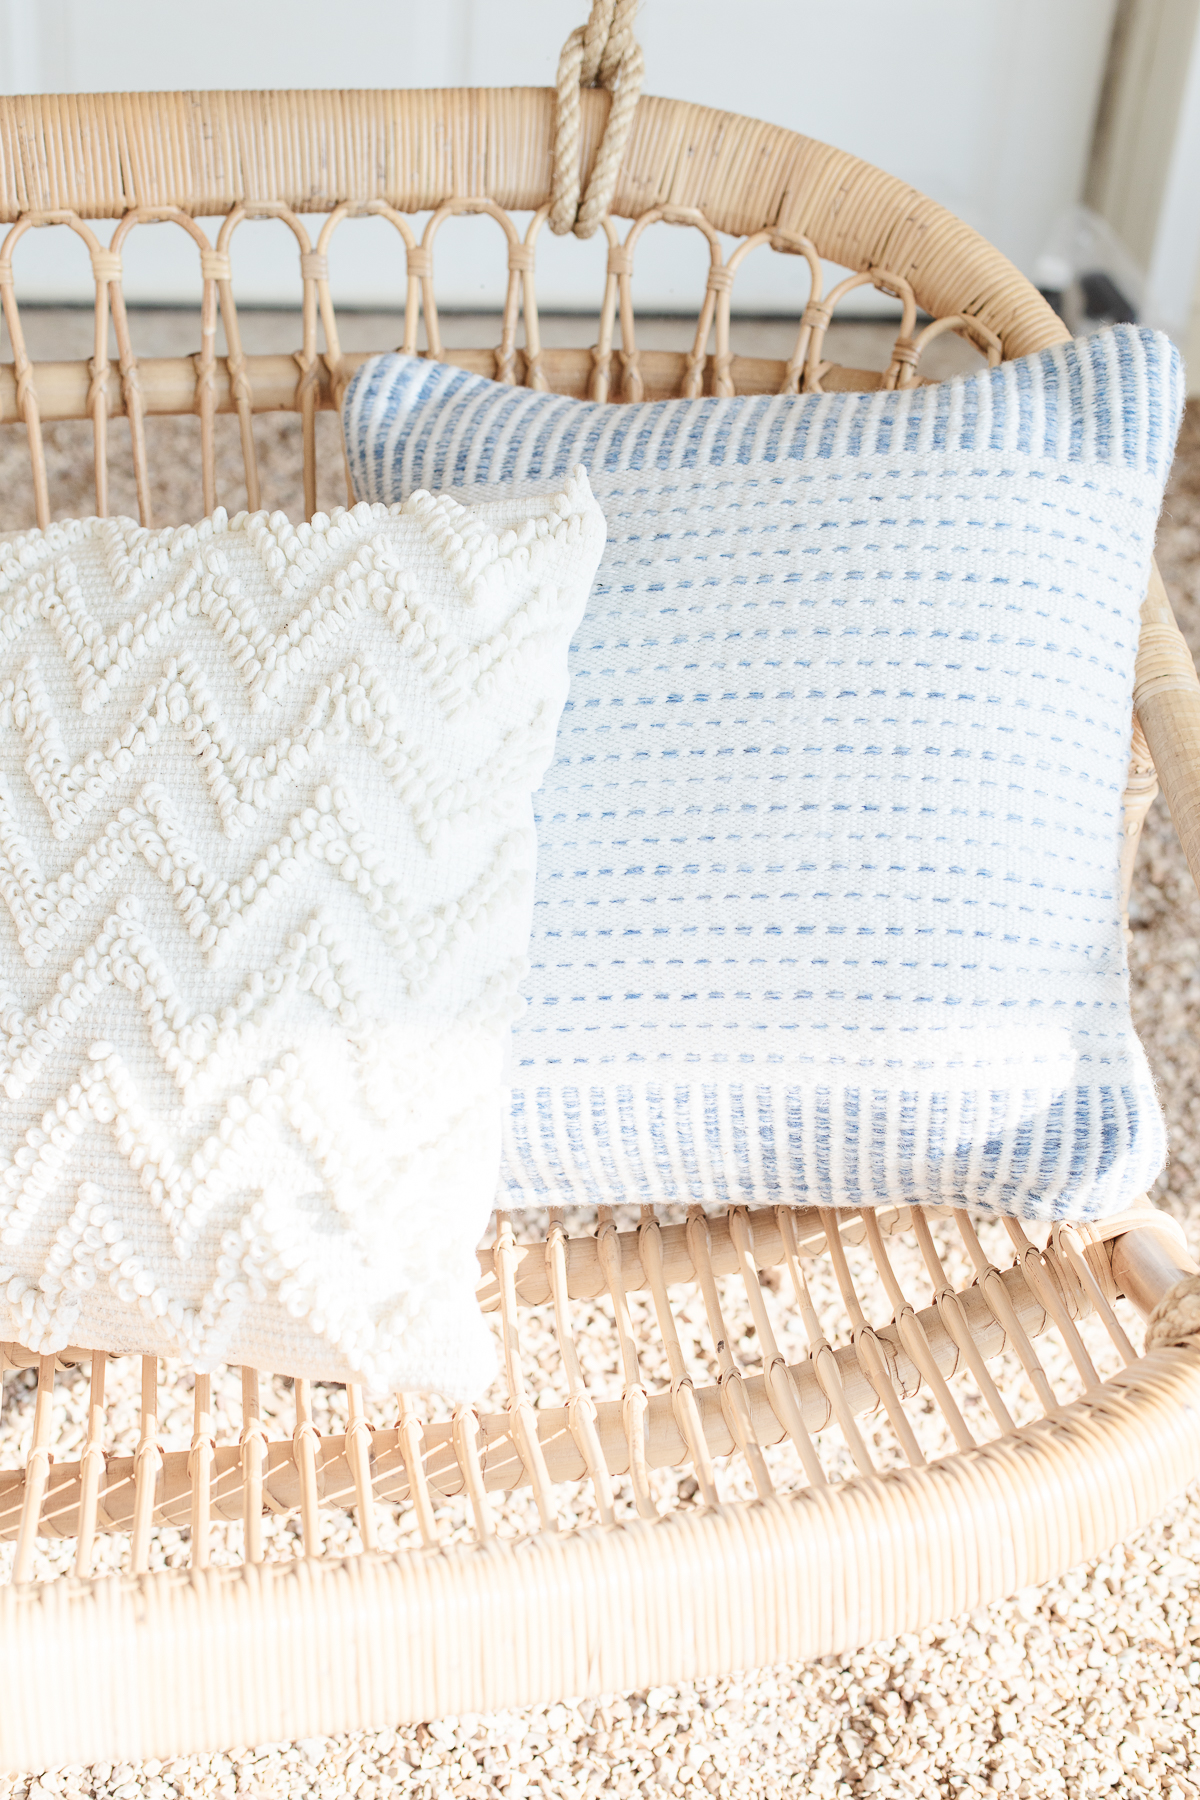 Blue and white pillows on a rattan sofa.